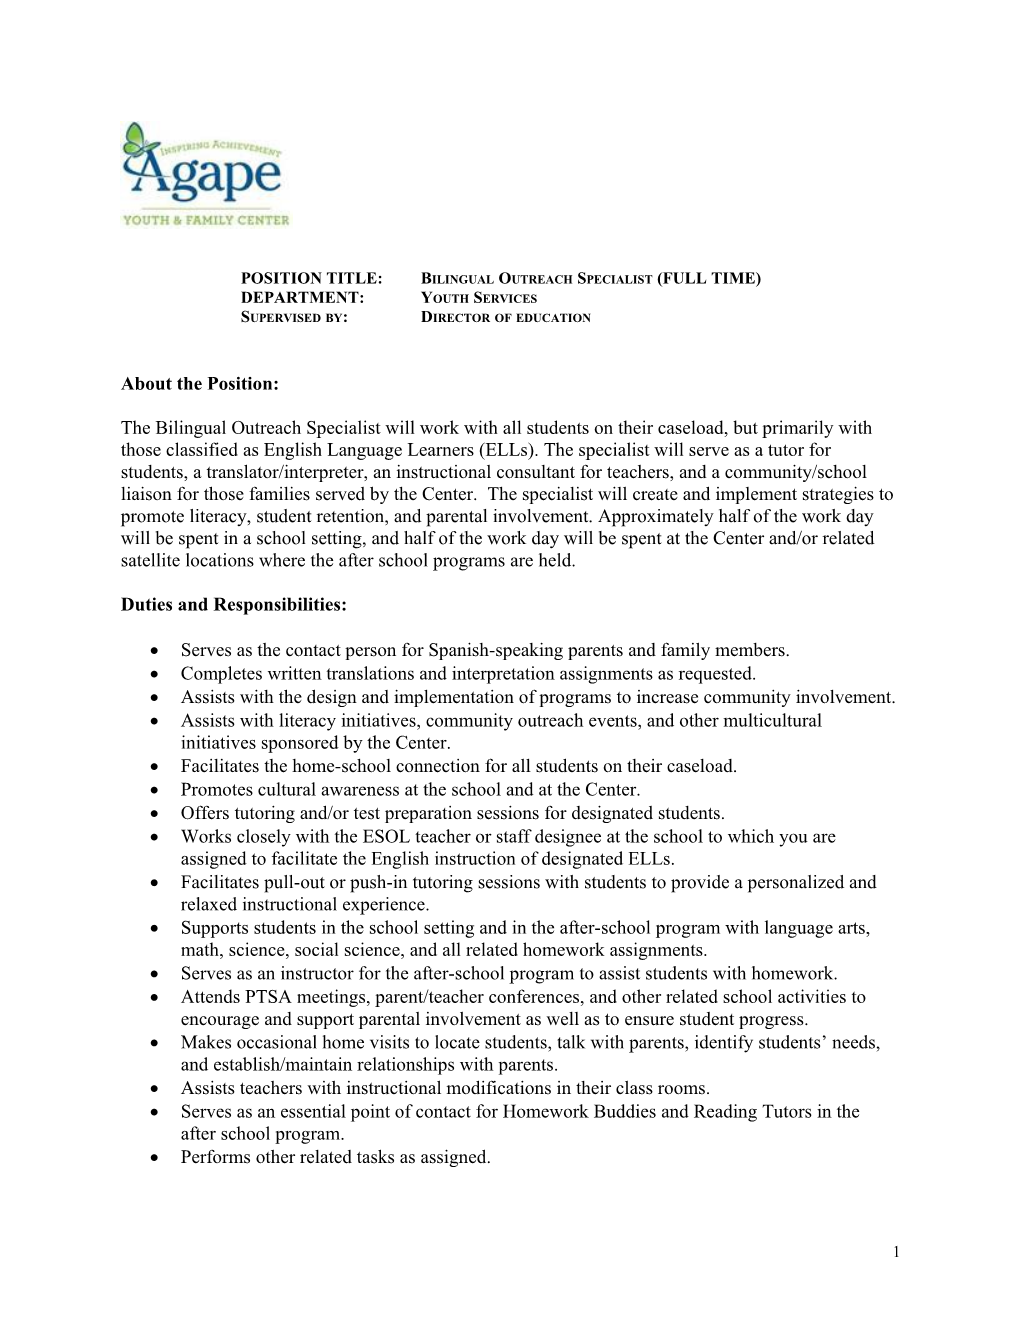 POSITION TITLE:Bilingual Outreach Specialist (FULL TIME)